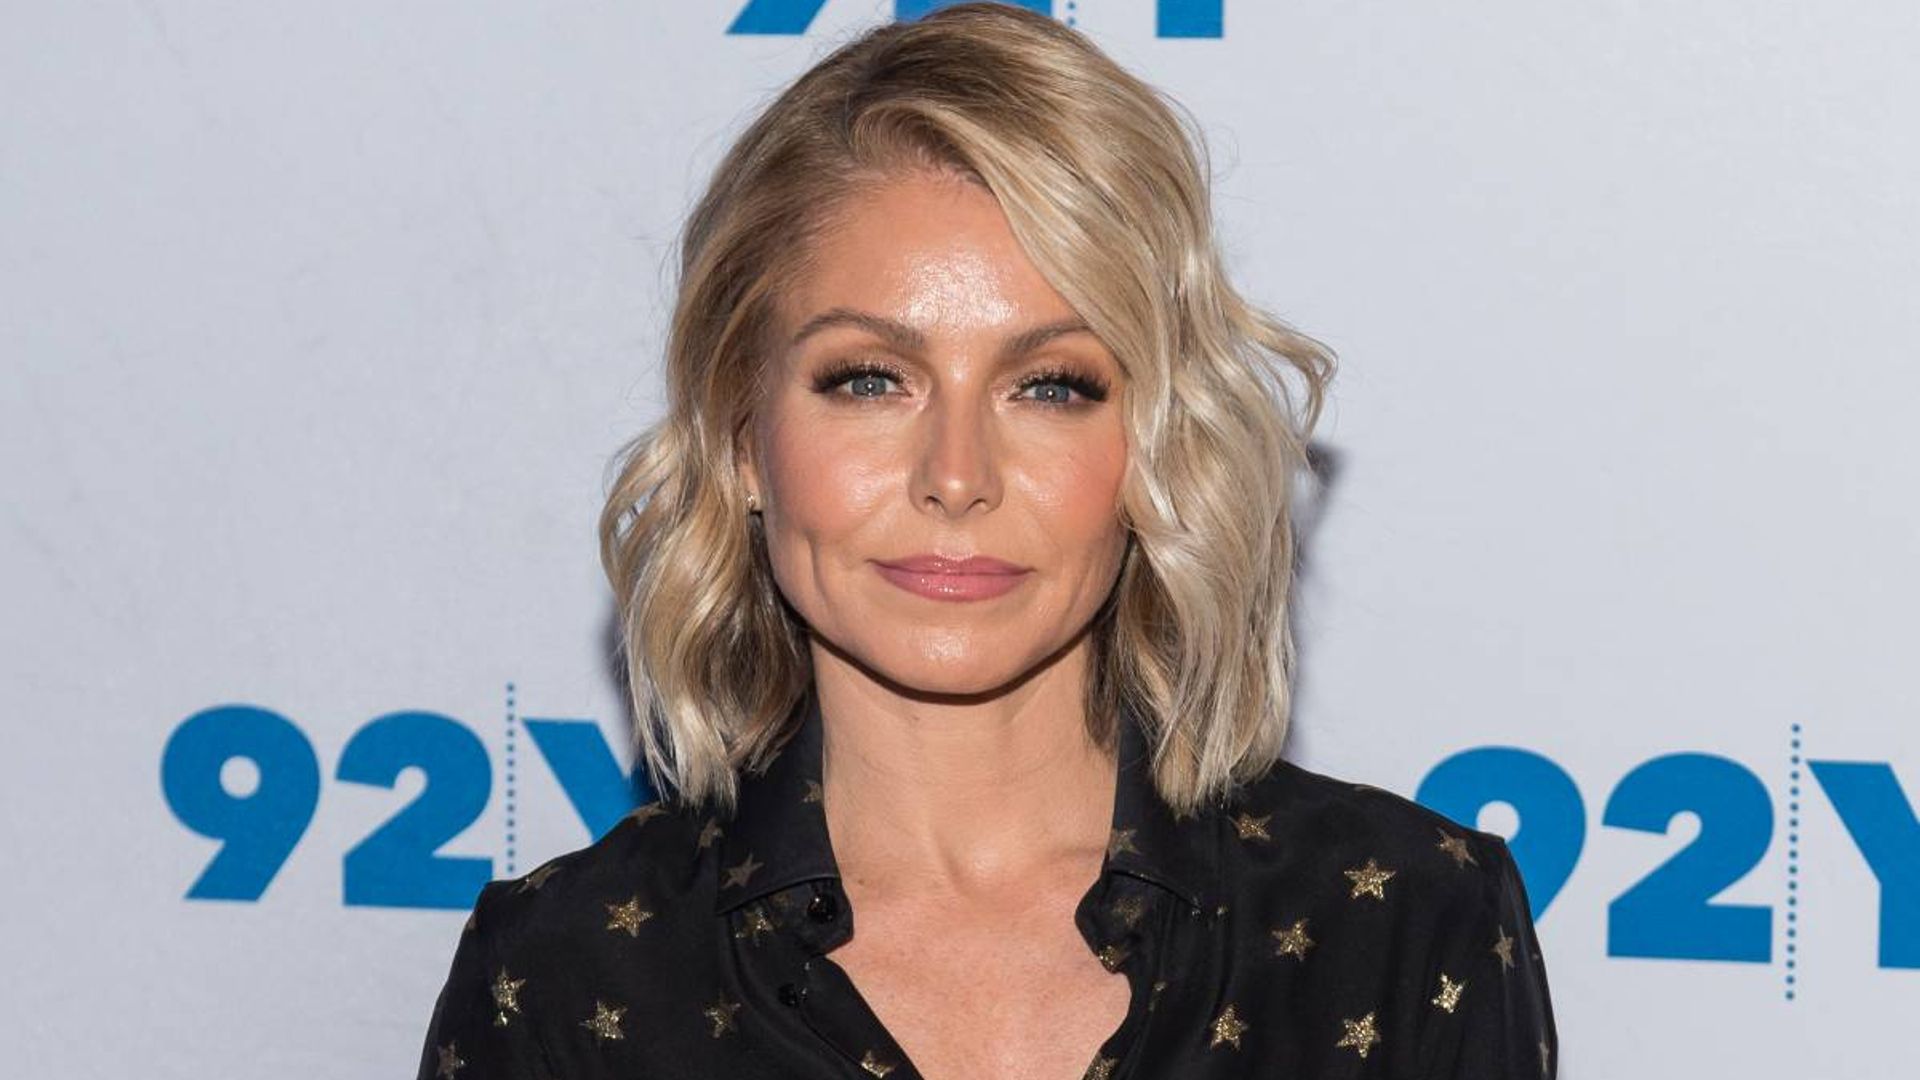 Kelly Ripa with dark hair has to be seen to be believed in incredible throwback photo